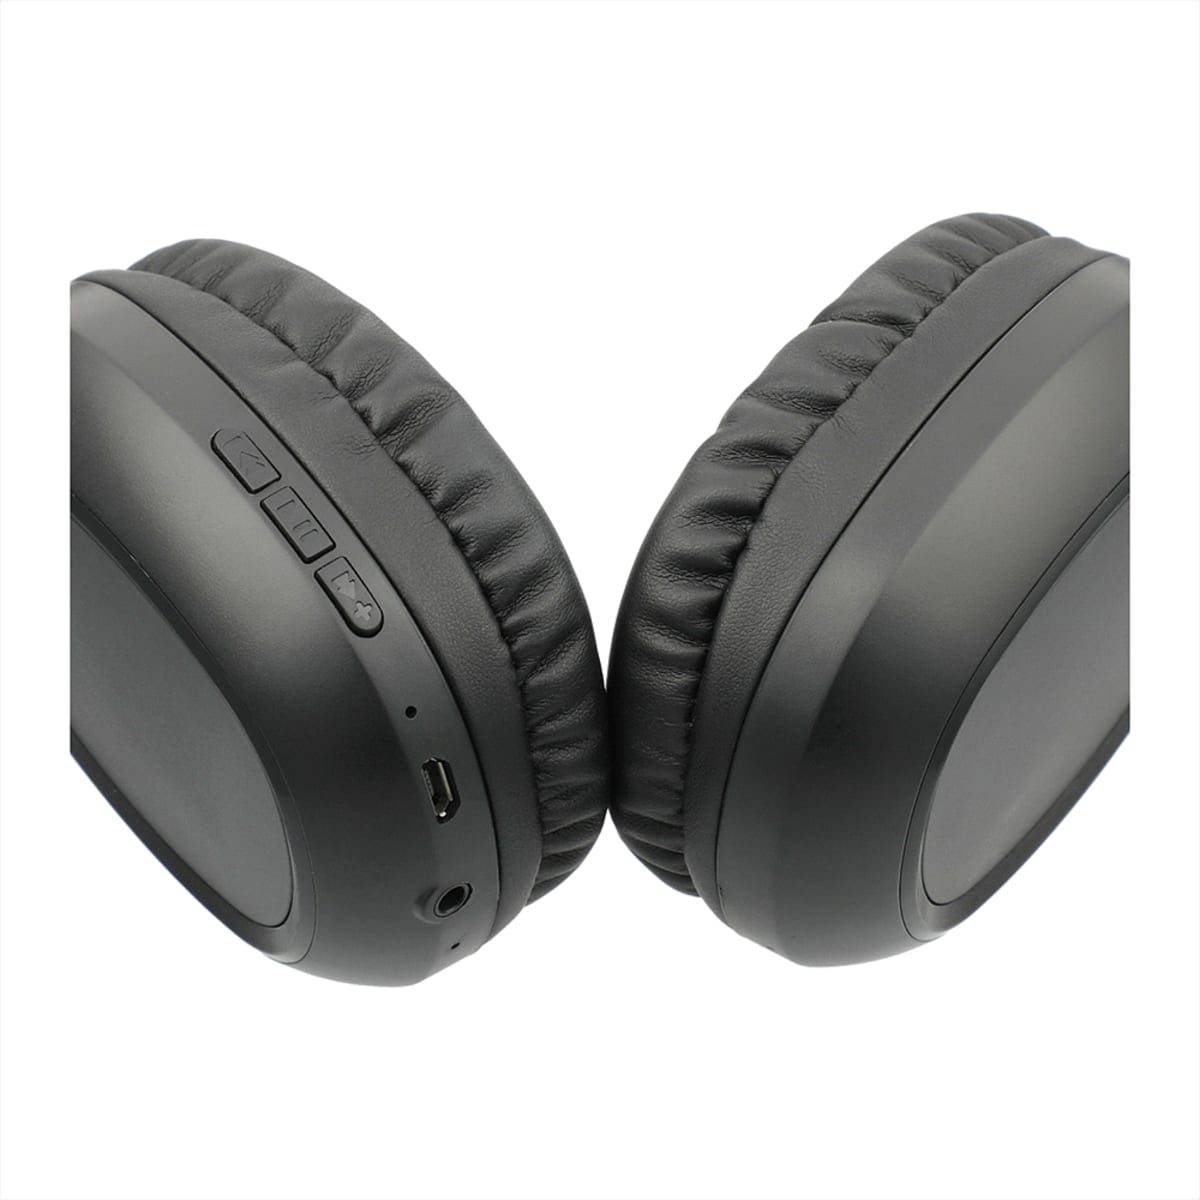 Oppo Bluetooth Headphones and Microphone